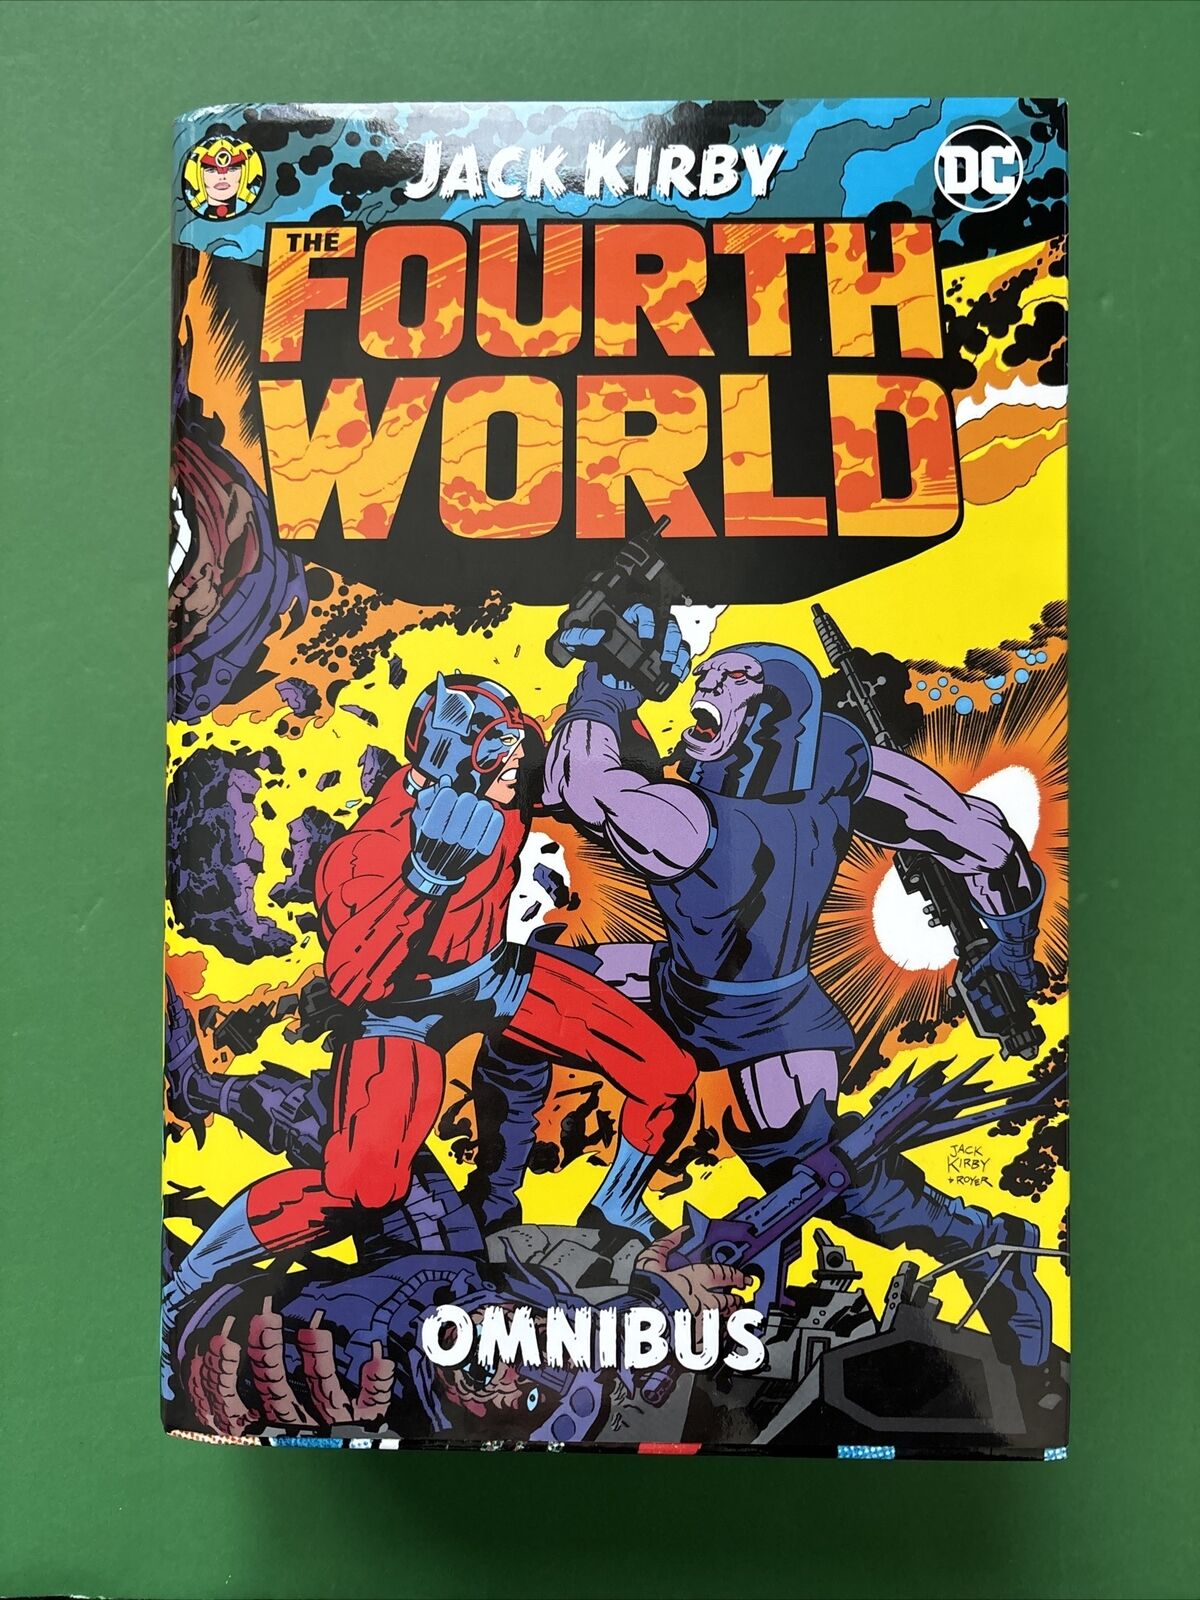 The Fourth World Omnibus by Jack Kirby (DC Comics, 2017 February 2018)